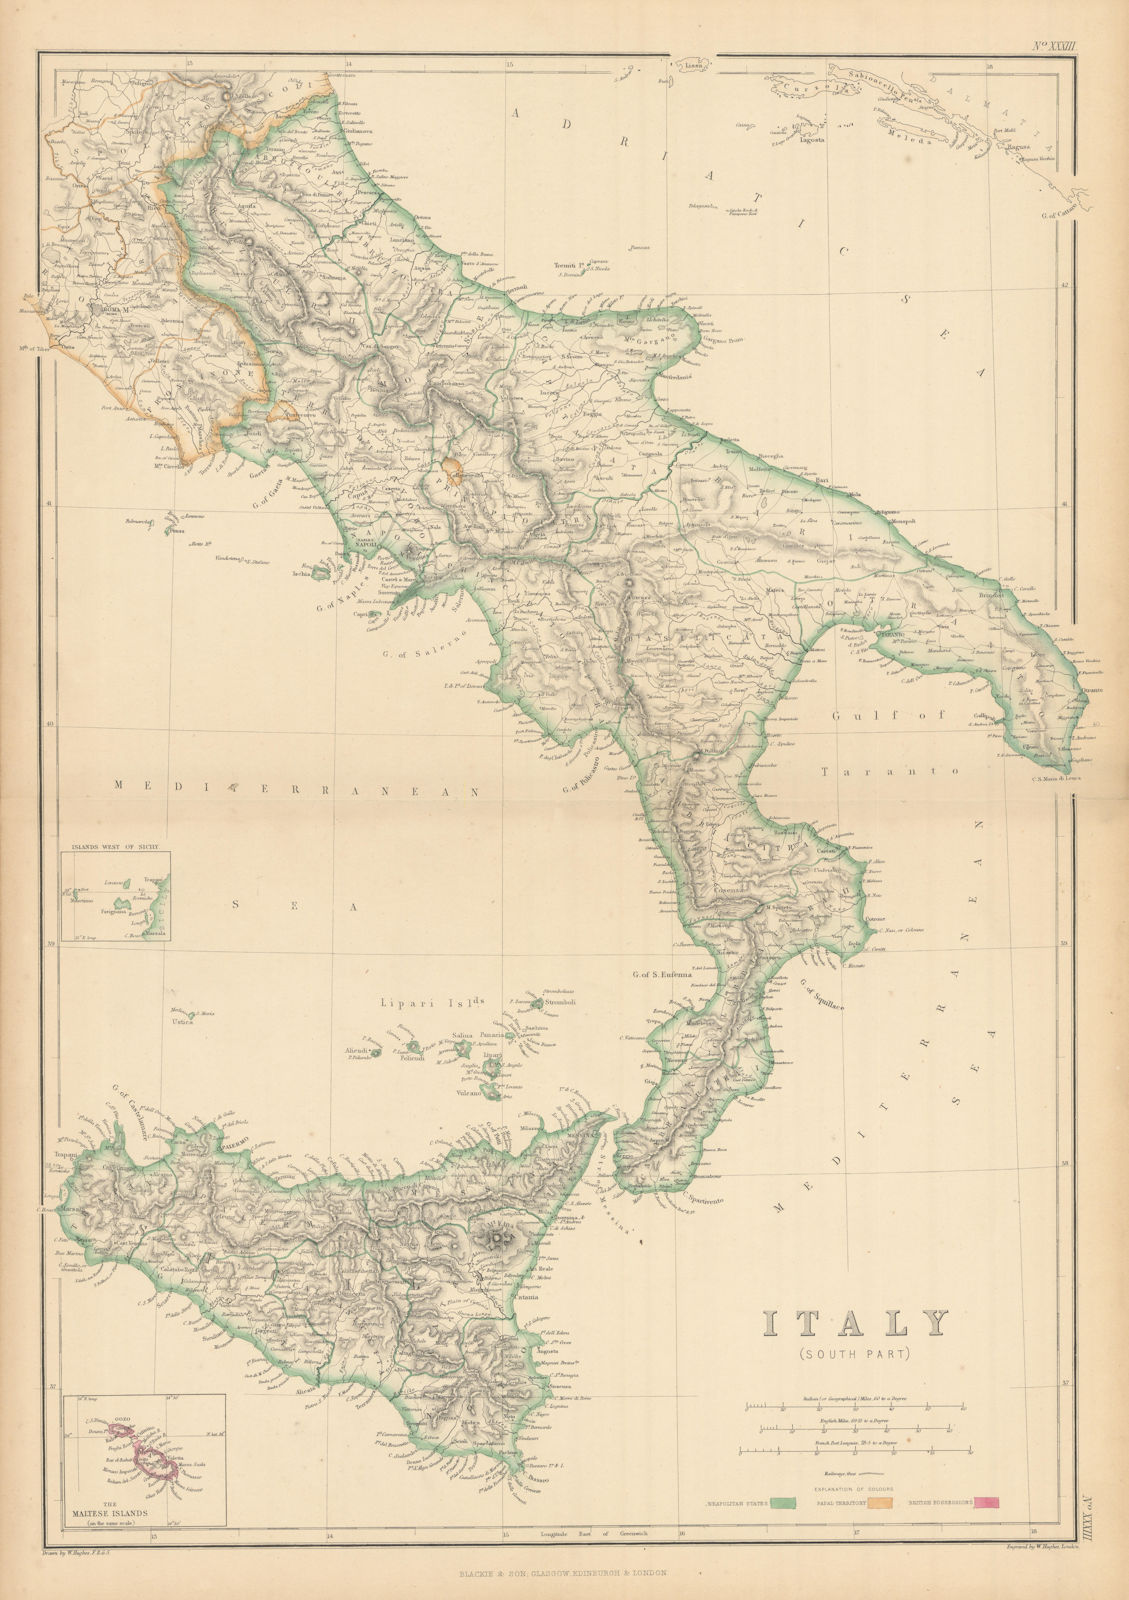 Southern Italy. Naples. Kingdom of the two Sicilies. By William Hughes 1859 map